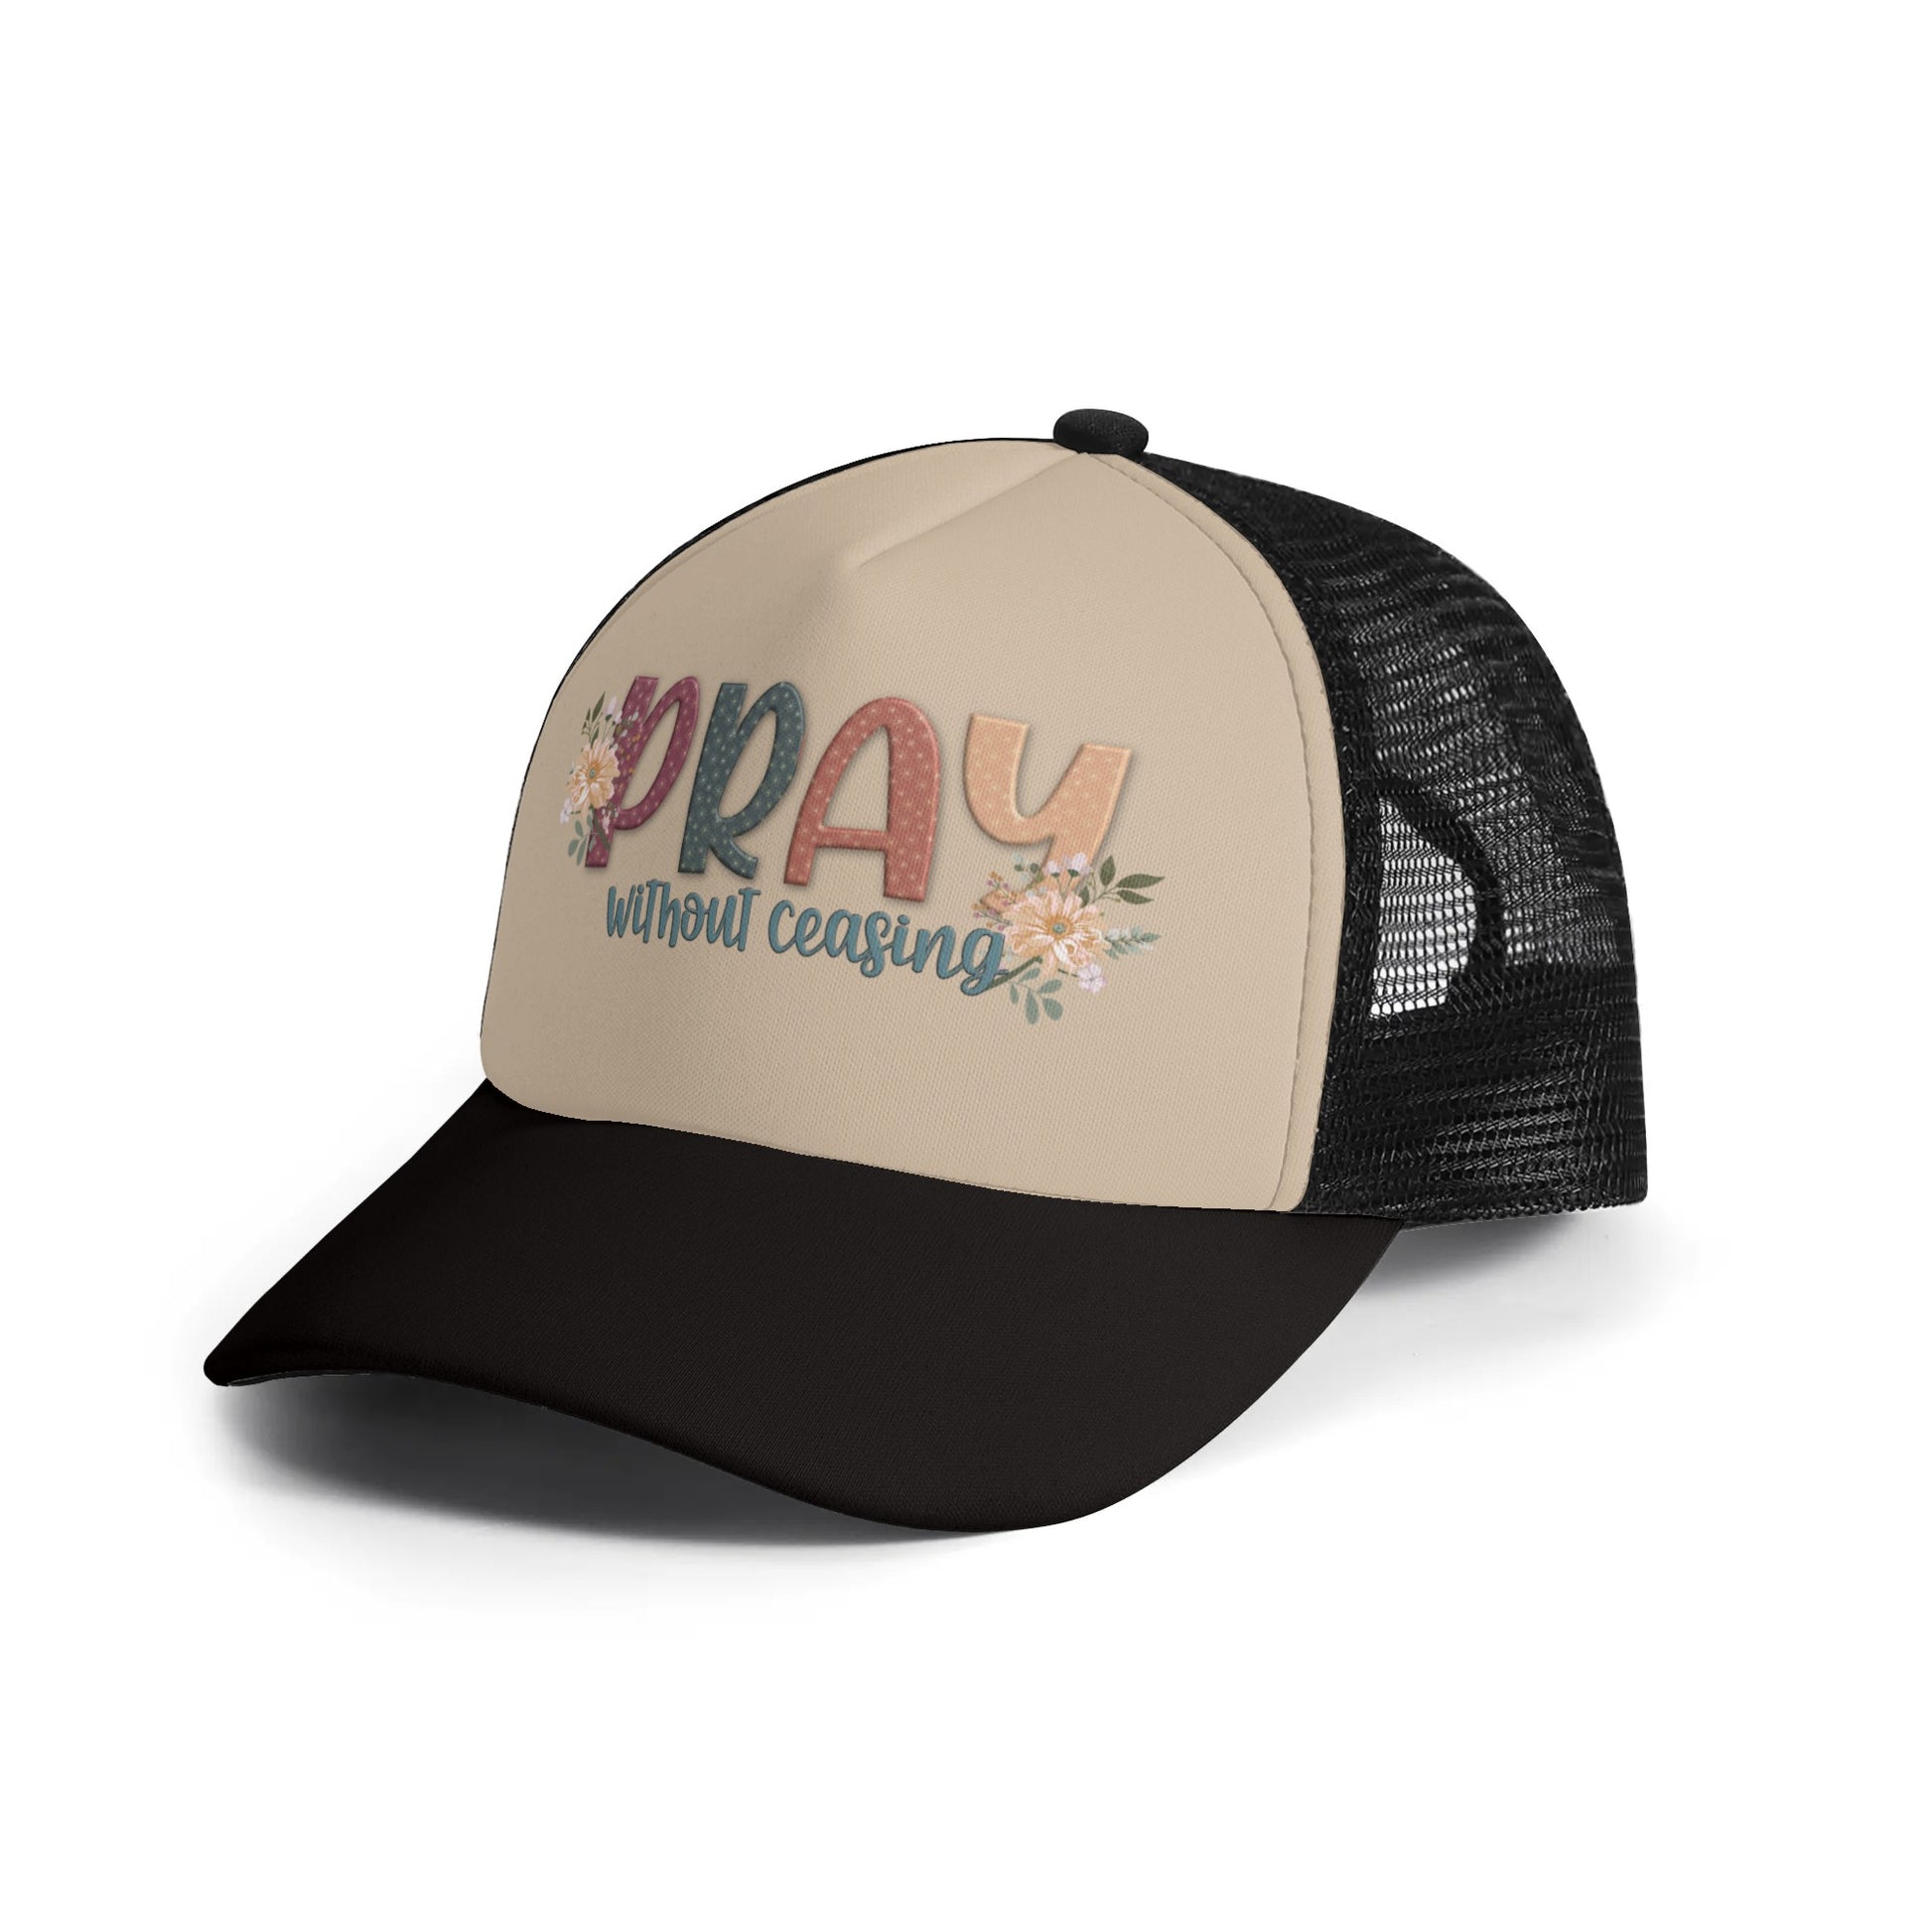 Pray Without Ceasing Christian Kids Hat popcustoms